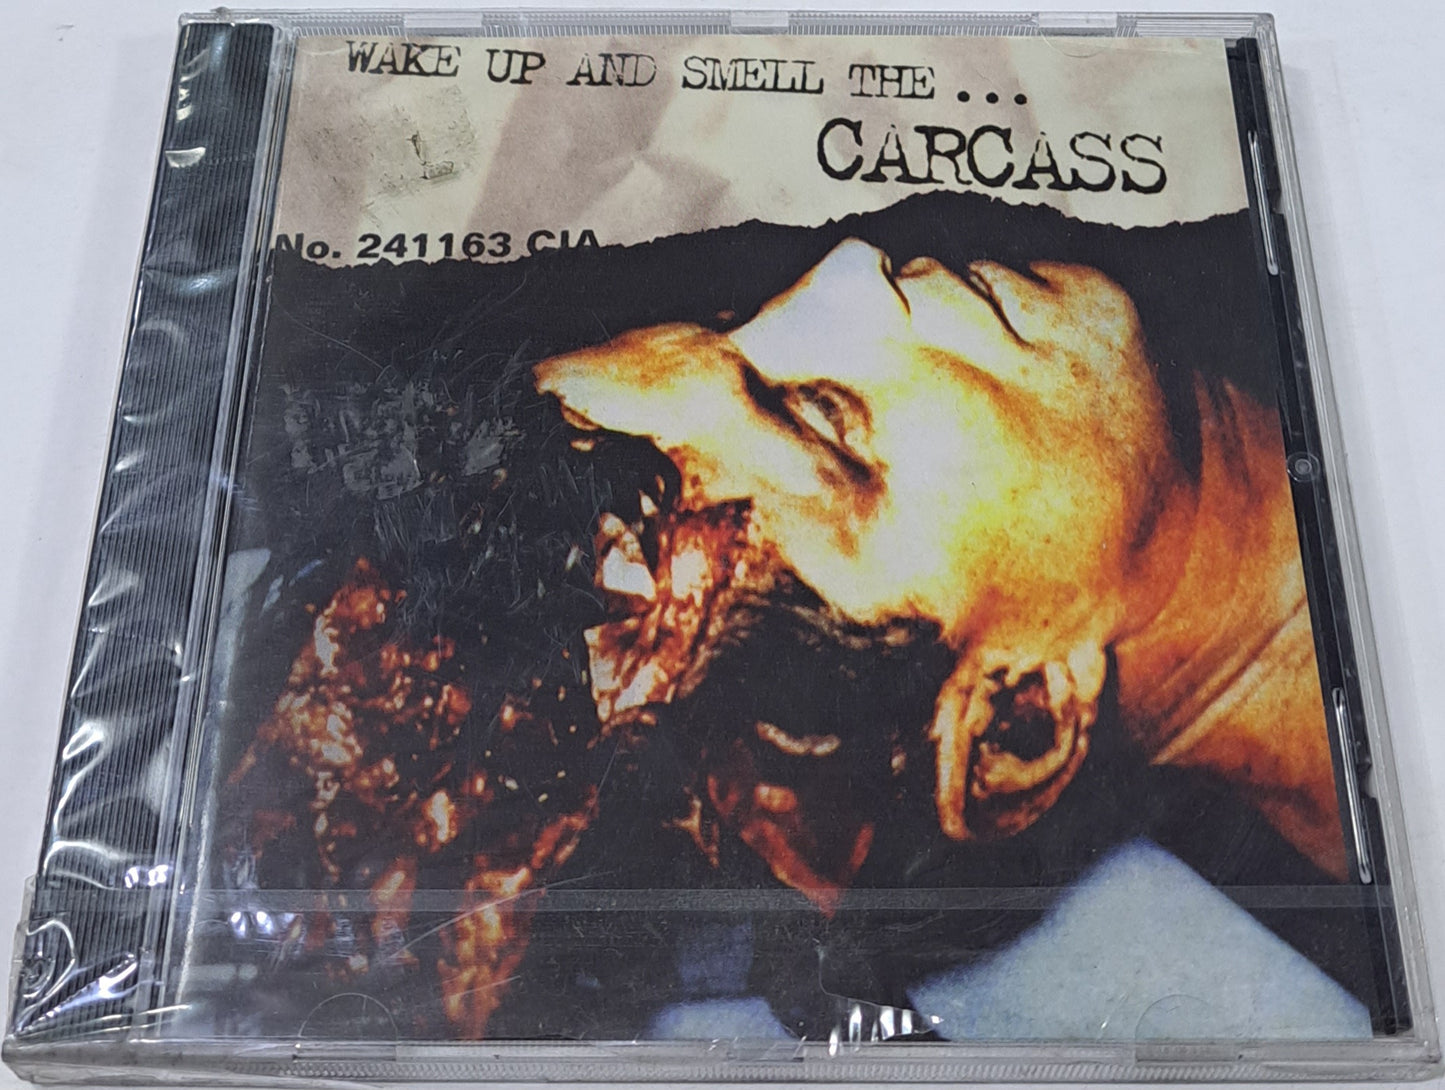 CARCASS - WAKE UP AND SMELL THE CARCASS  CD